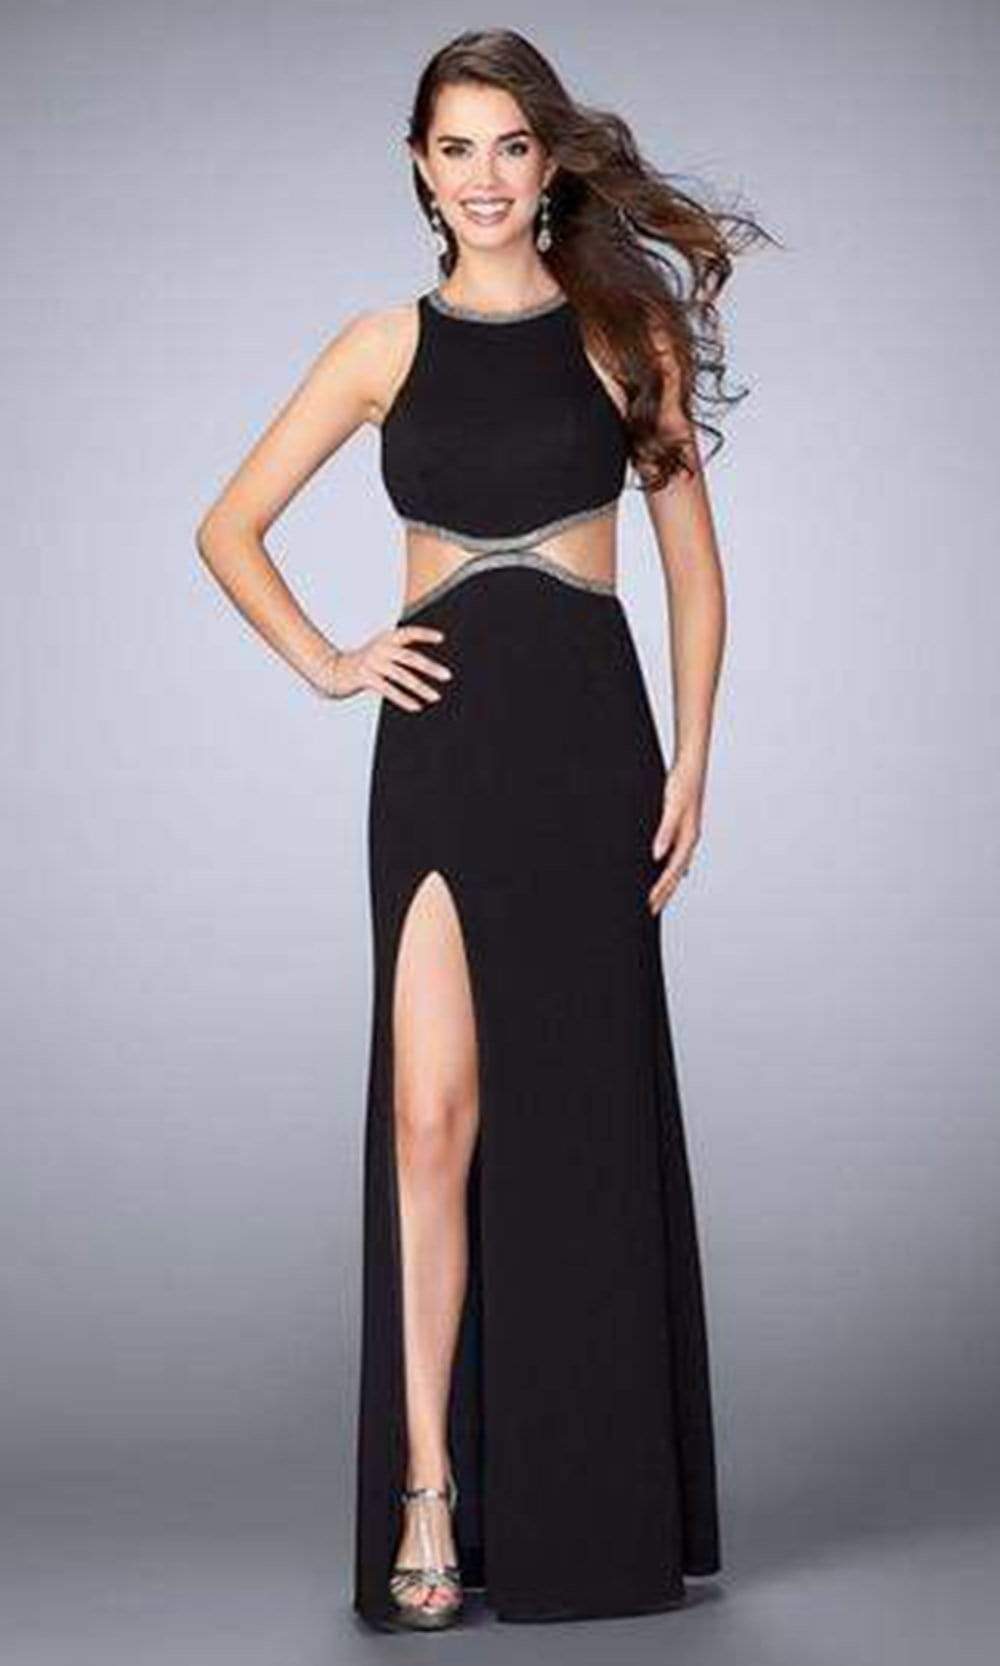 La Femme - Beaded Sleeveless Cutouts Evening Gown With Slit 23418SC - 1 pc Black In Size 2 Available CCSALE 2 / Black